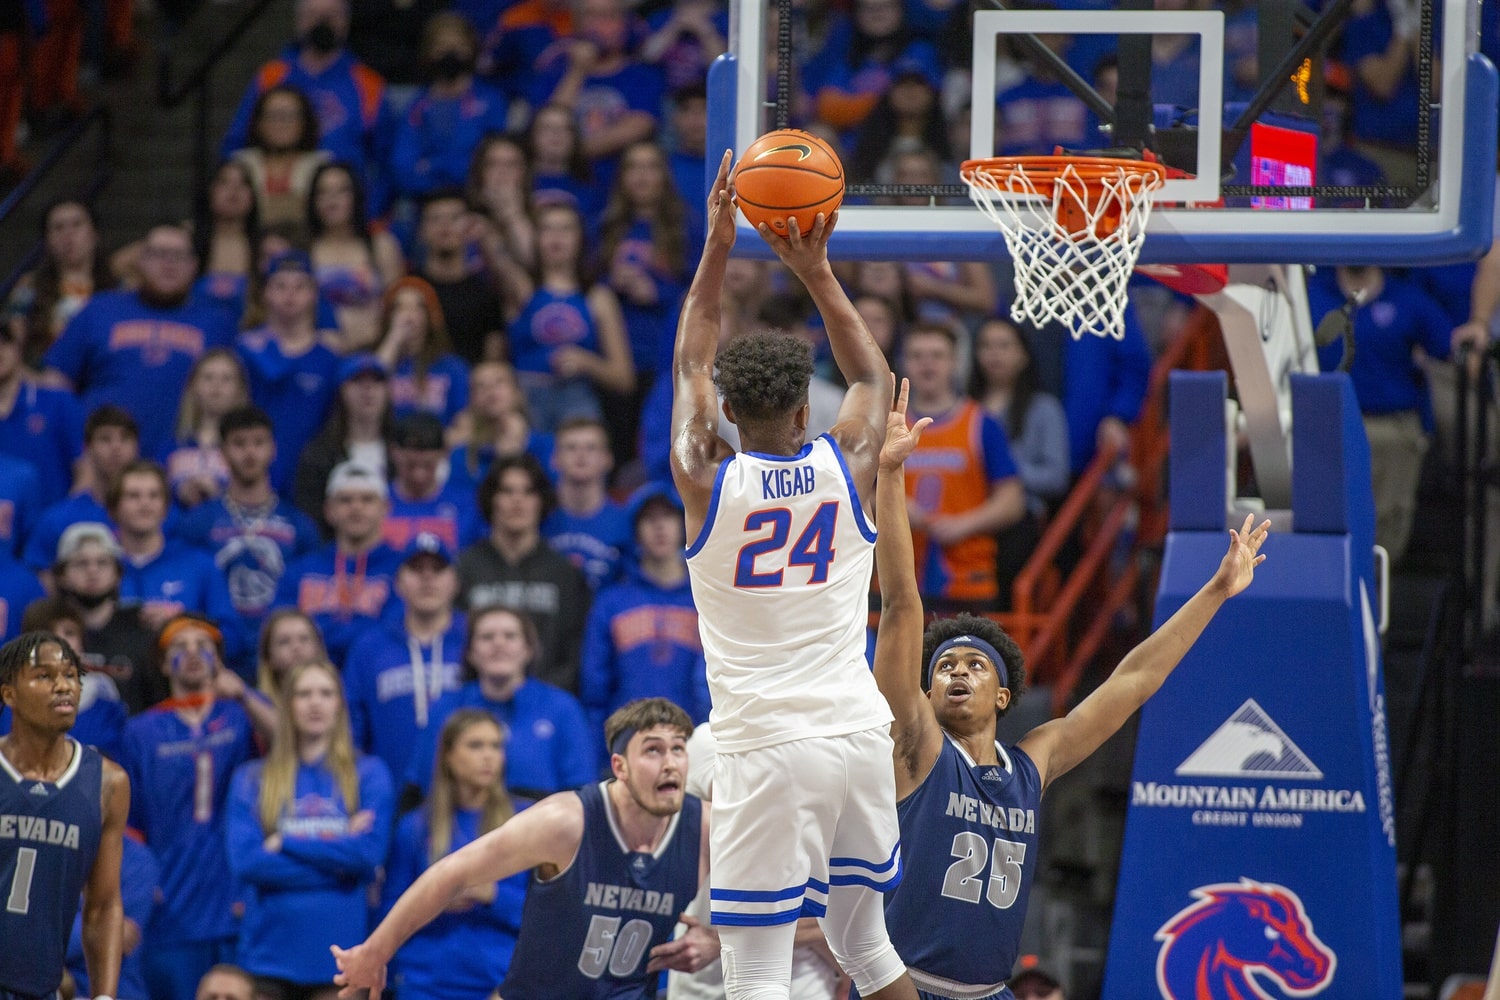 Mar 1, 2022; Boise, Idaho, USA; Boise State Broncos forward Abu Kigab (24) shoots a thee point shot during first half against the Nevada Wolf Pack at ExtraMile Arena.